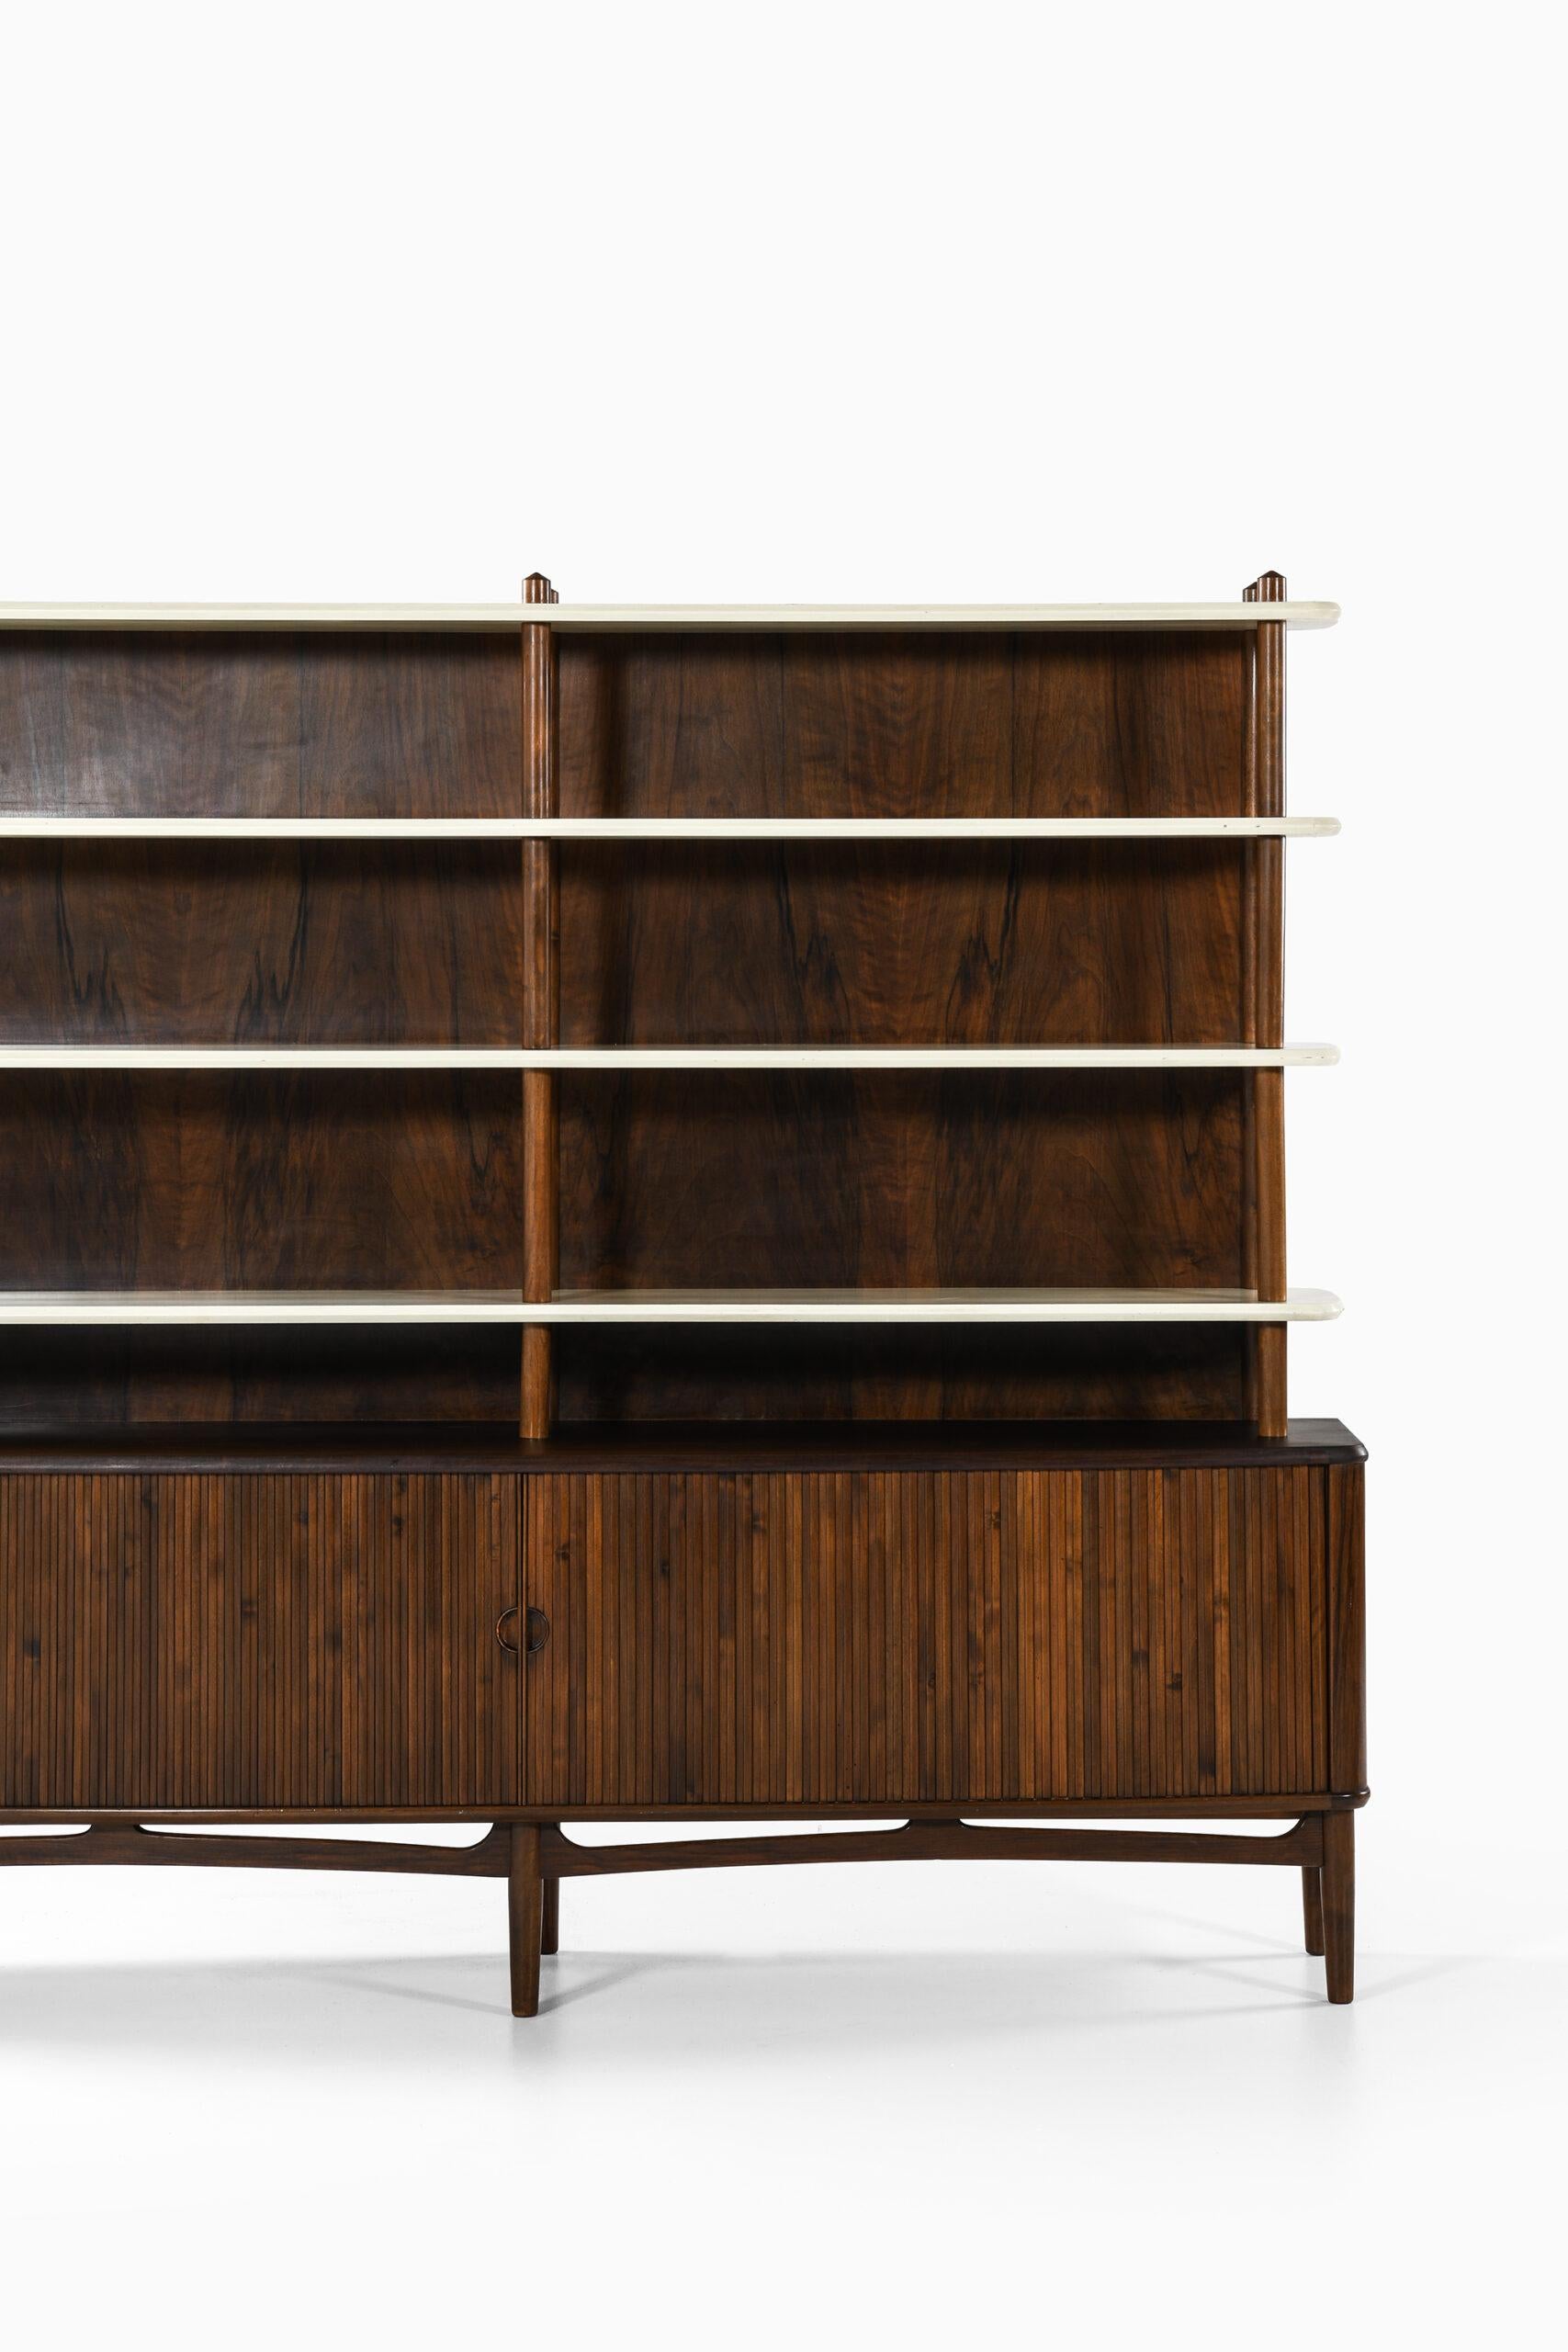 Rare bookcase designed by Kurt Olsen. Produced by A. Andersen & Bohm in Denmark.